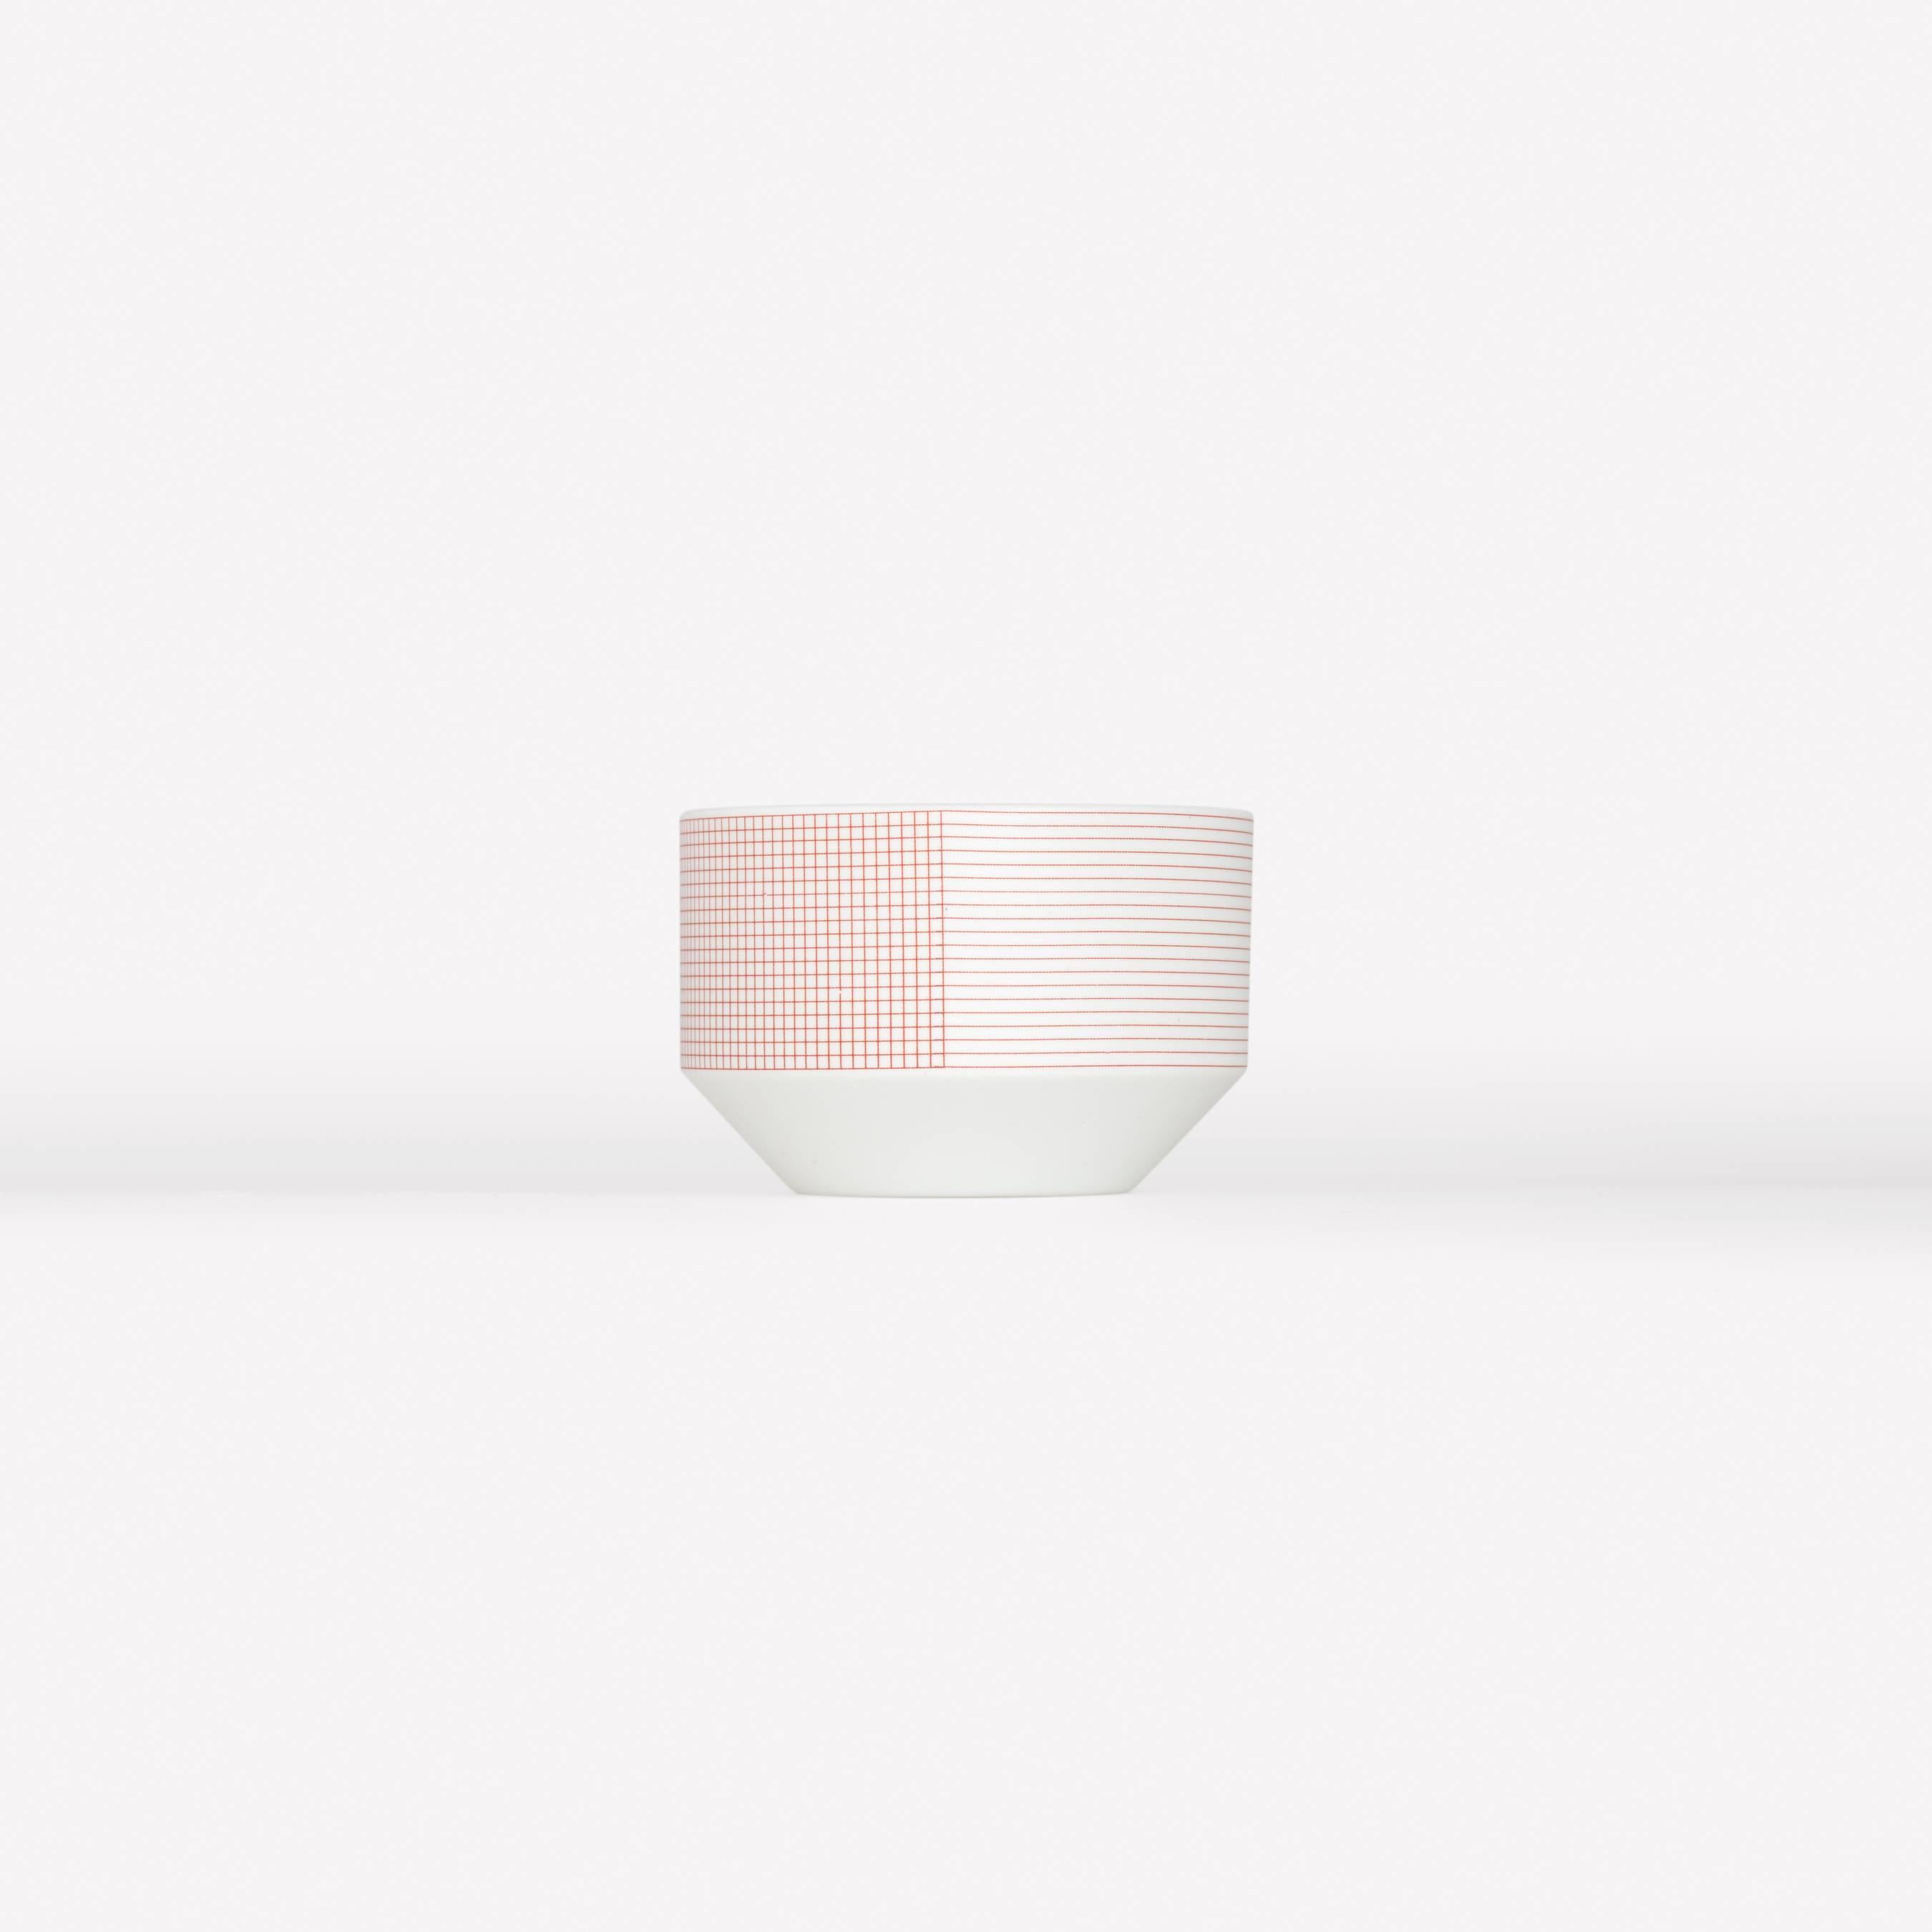 Pattern Porcelain Cup by Scholten & Baijings
002 Petal

Porcelain with Grid textile graphic. Matte exterior with gloss interior. Made in japan by 1616 / arita Japan. Dishwasher safe.

Scholten & Baijings for Maharam is a collection of home goods and